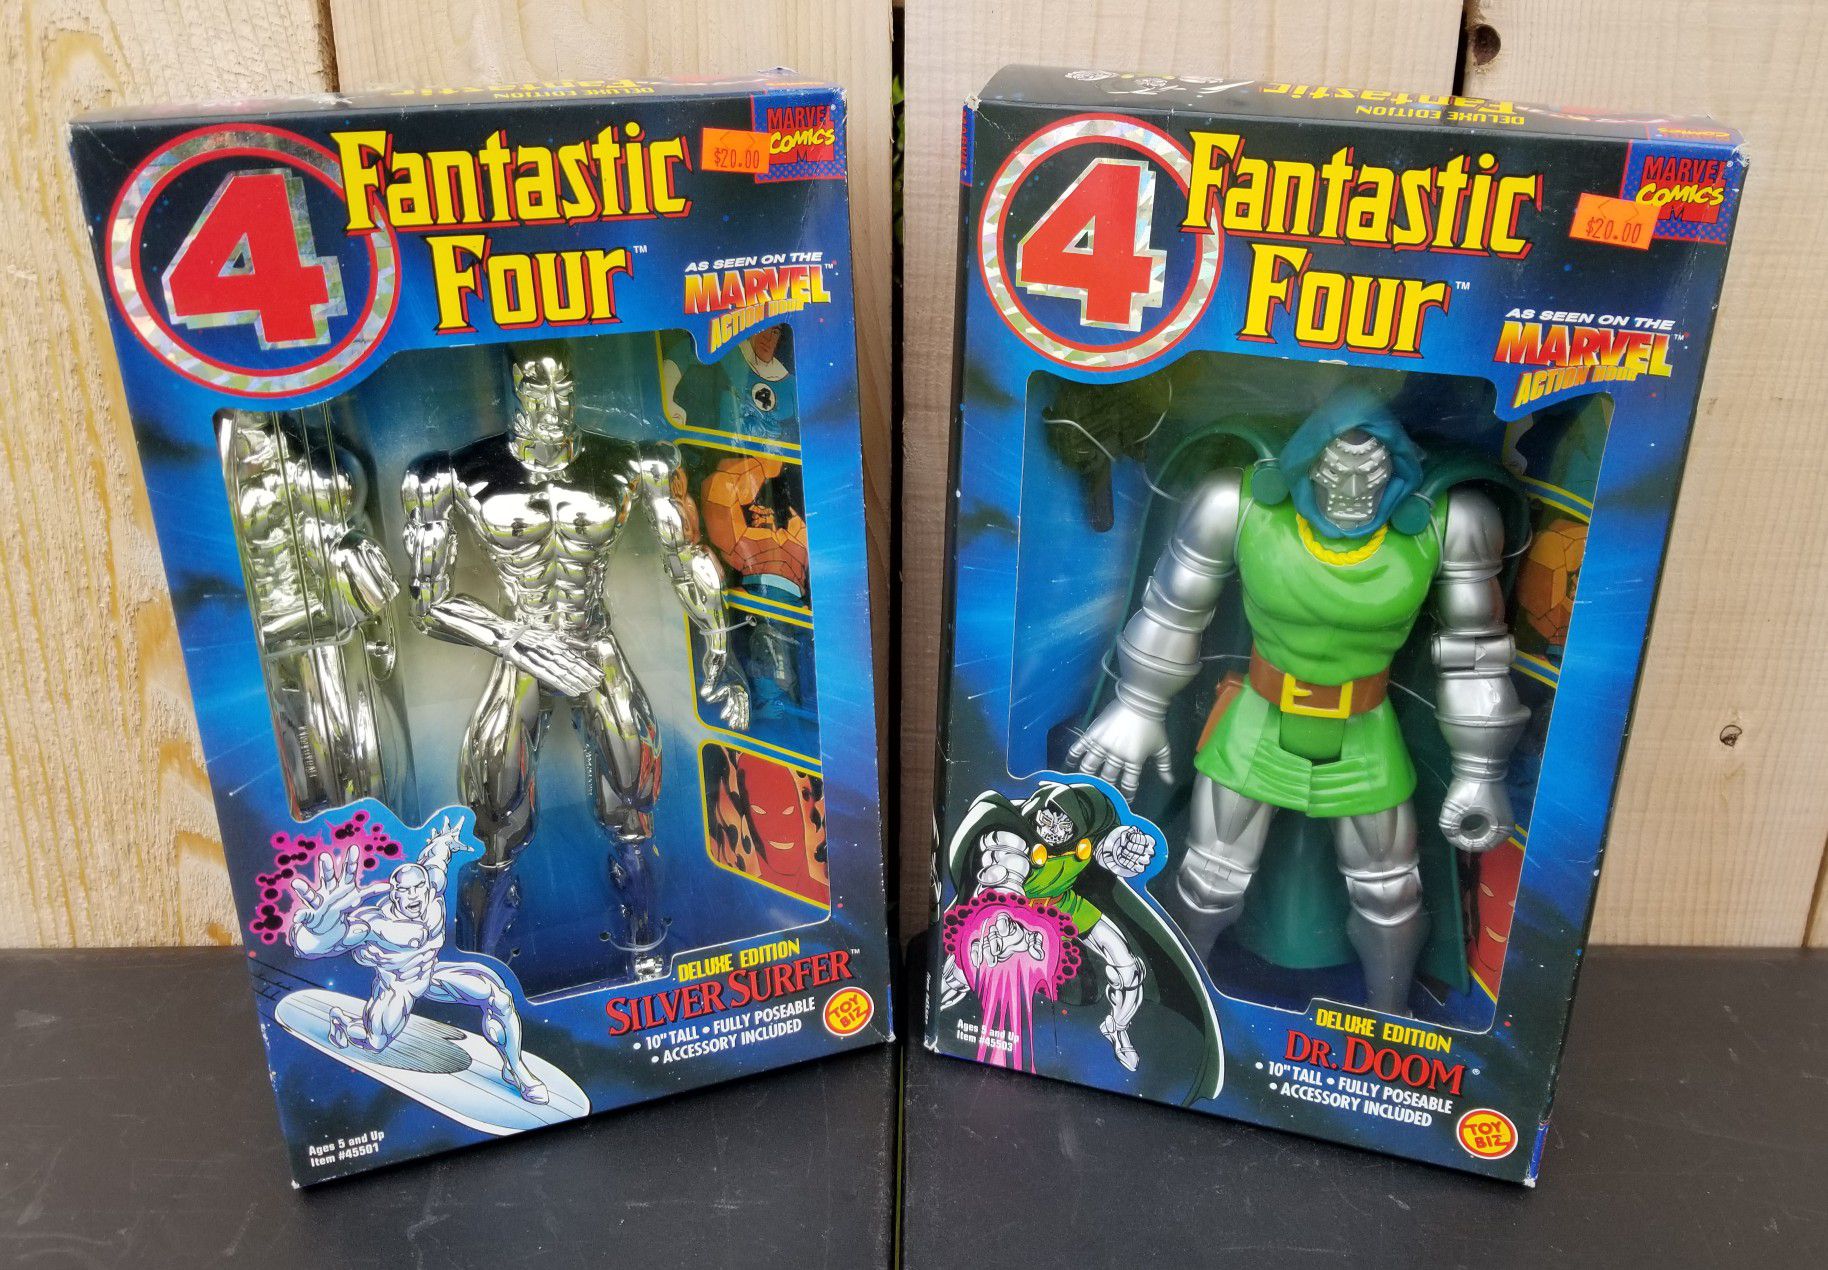 ($20 EACH) NEW 1O" DELUXE EDITION FANTASTIC FOUR ACTION FIGURE